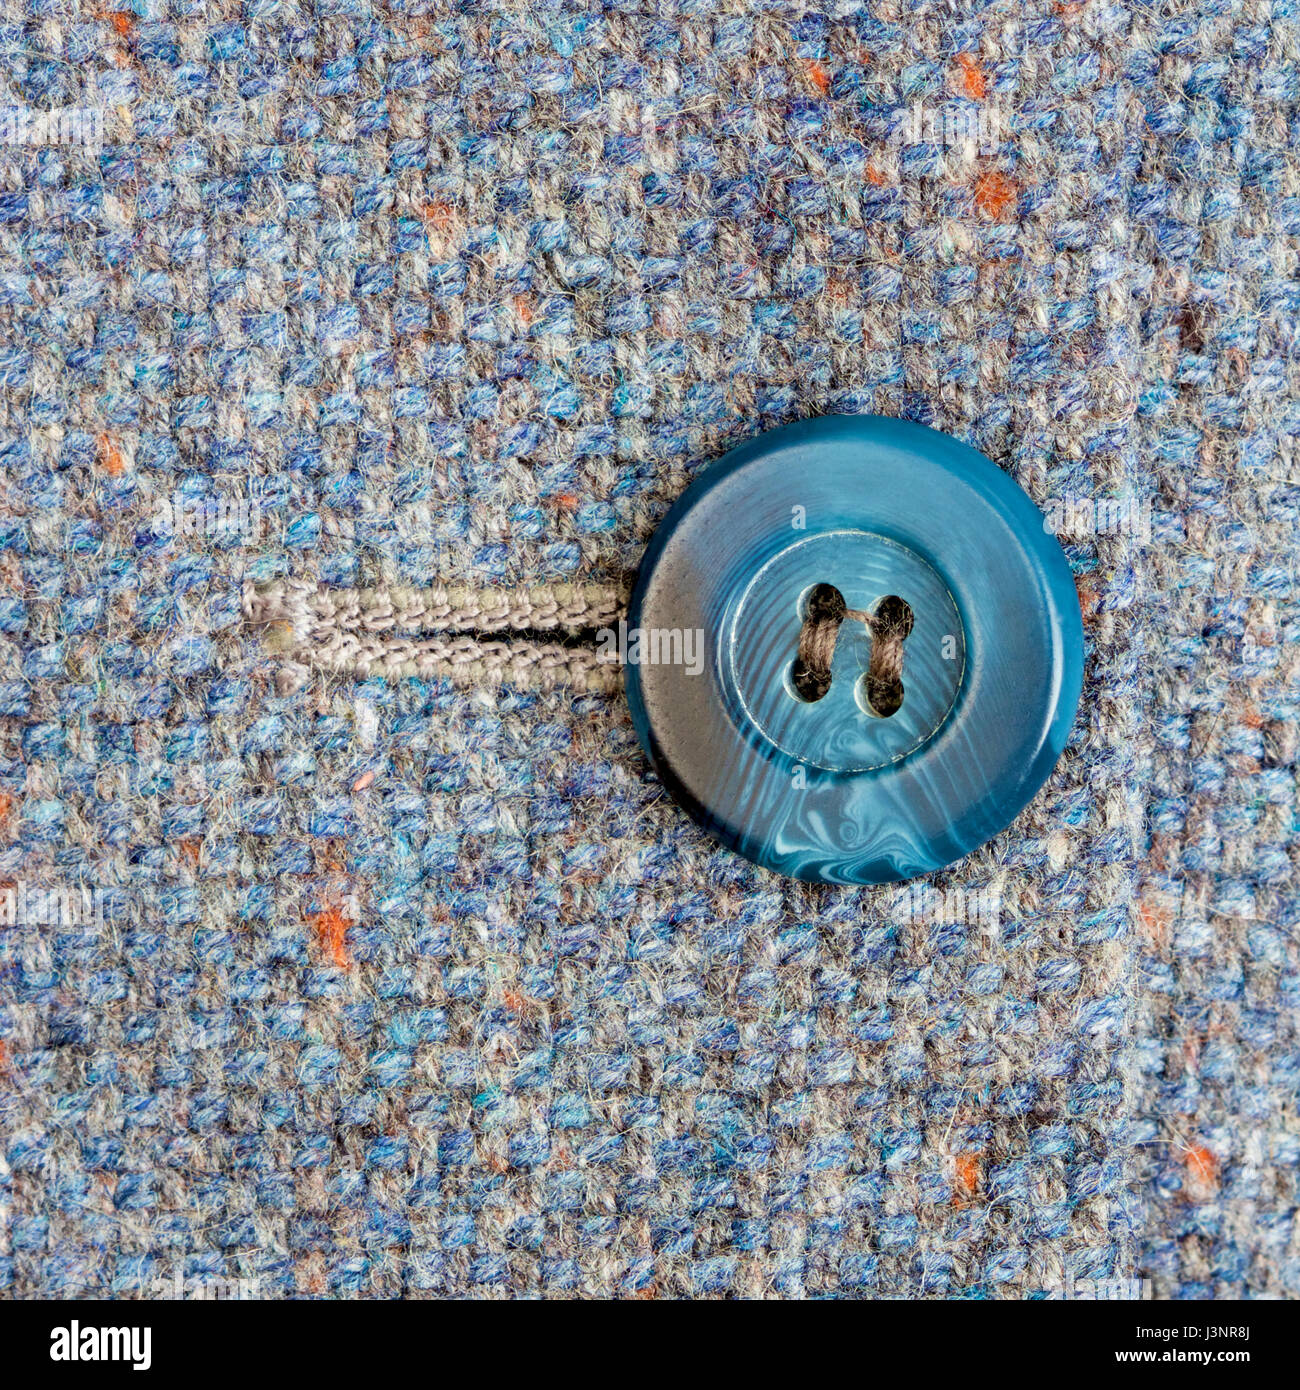 Blue button on a tweed fabric coat. Stock Photo